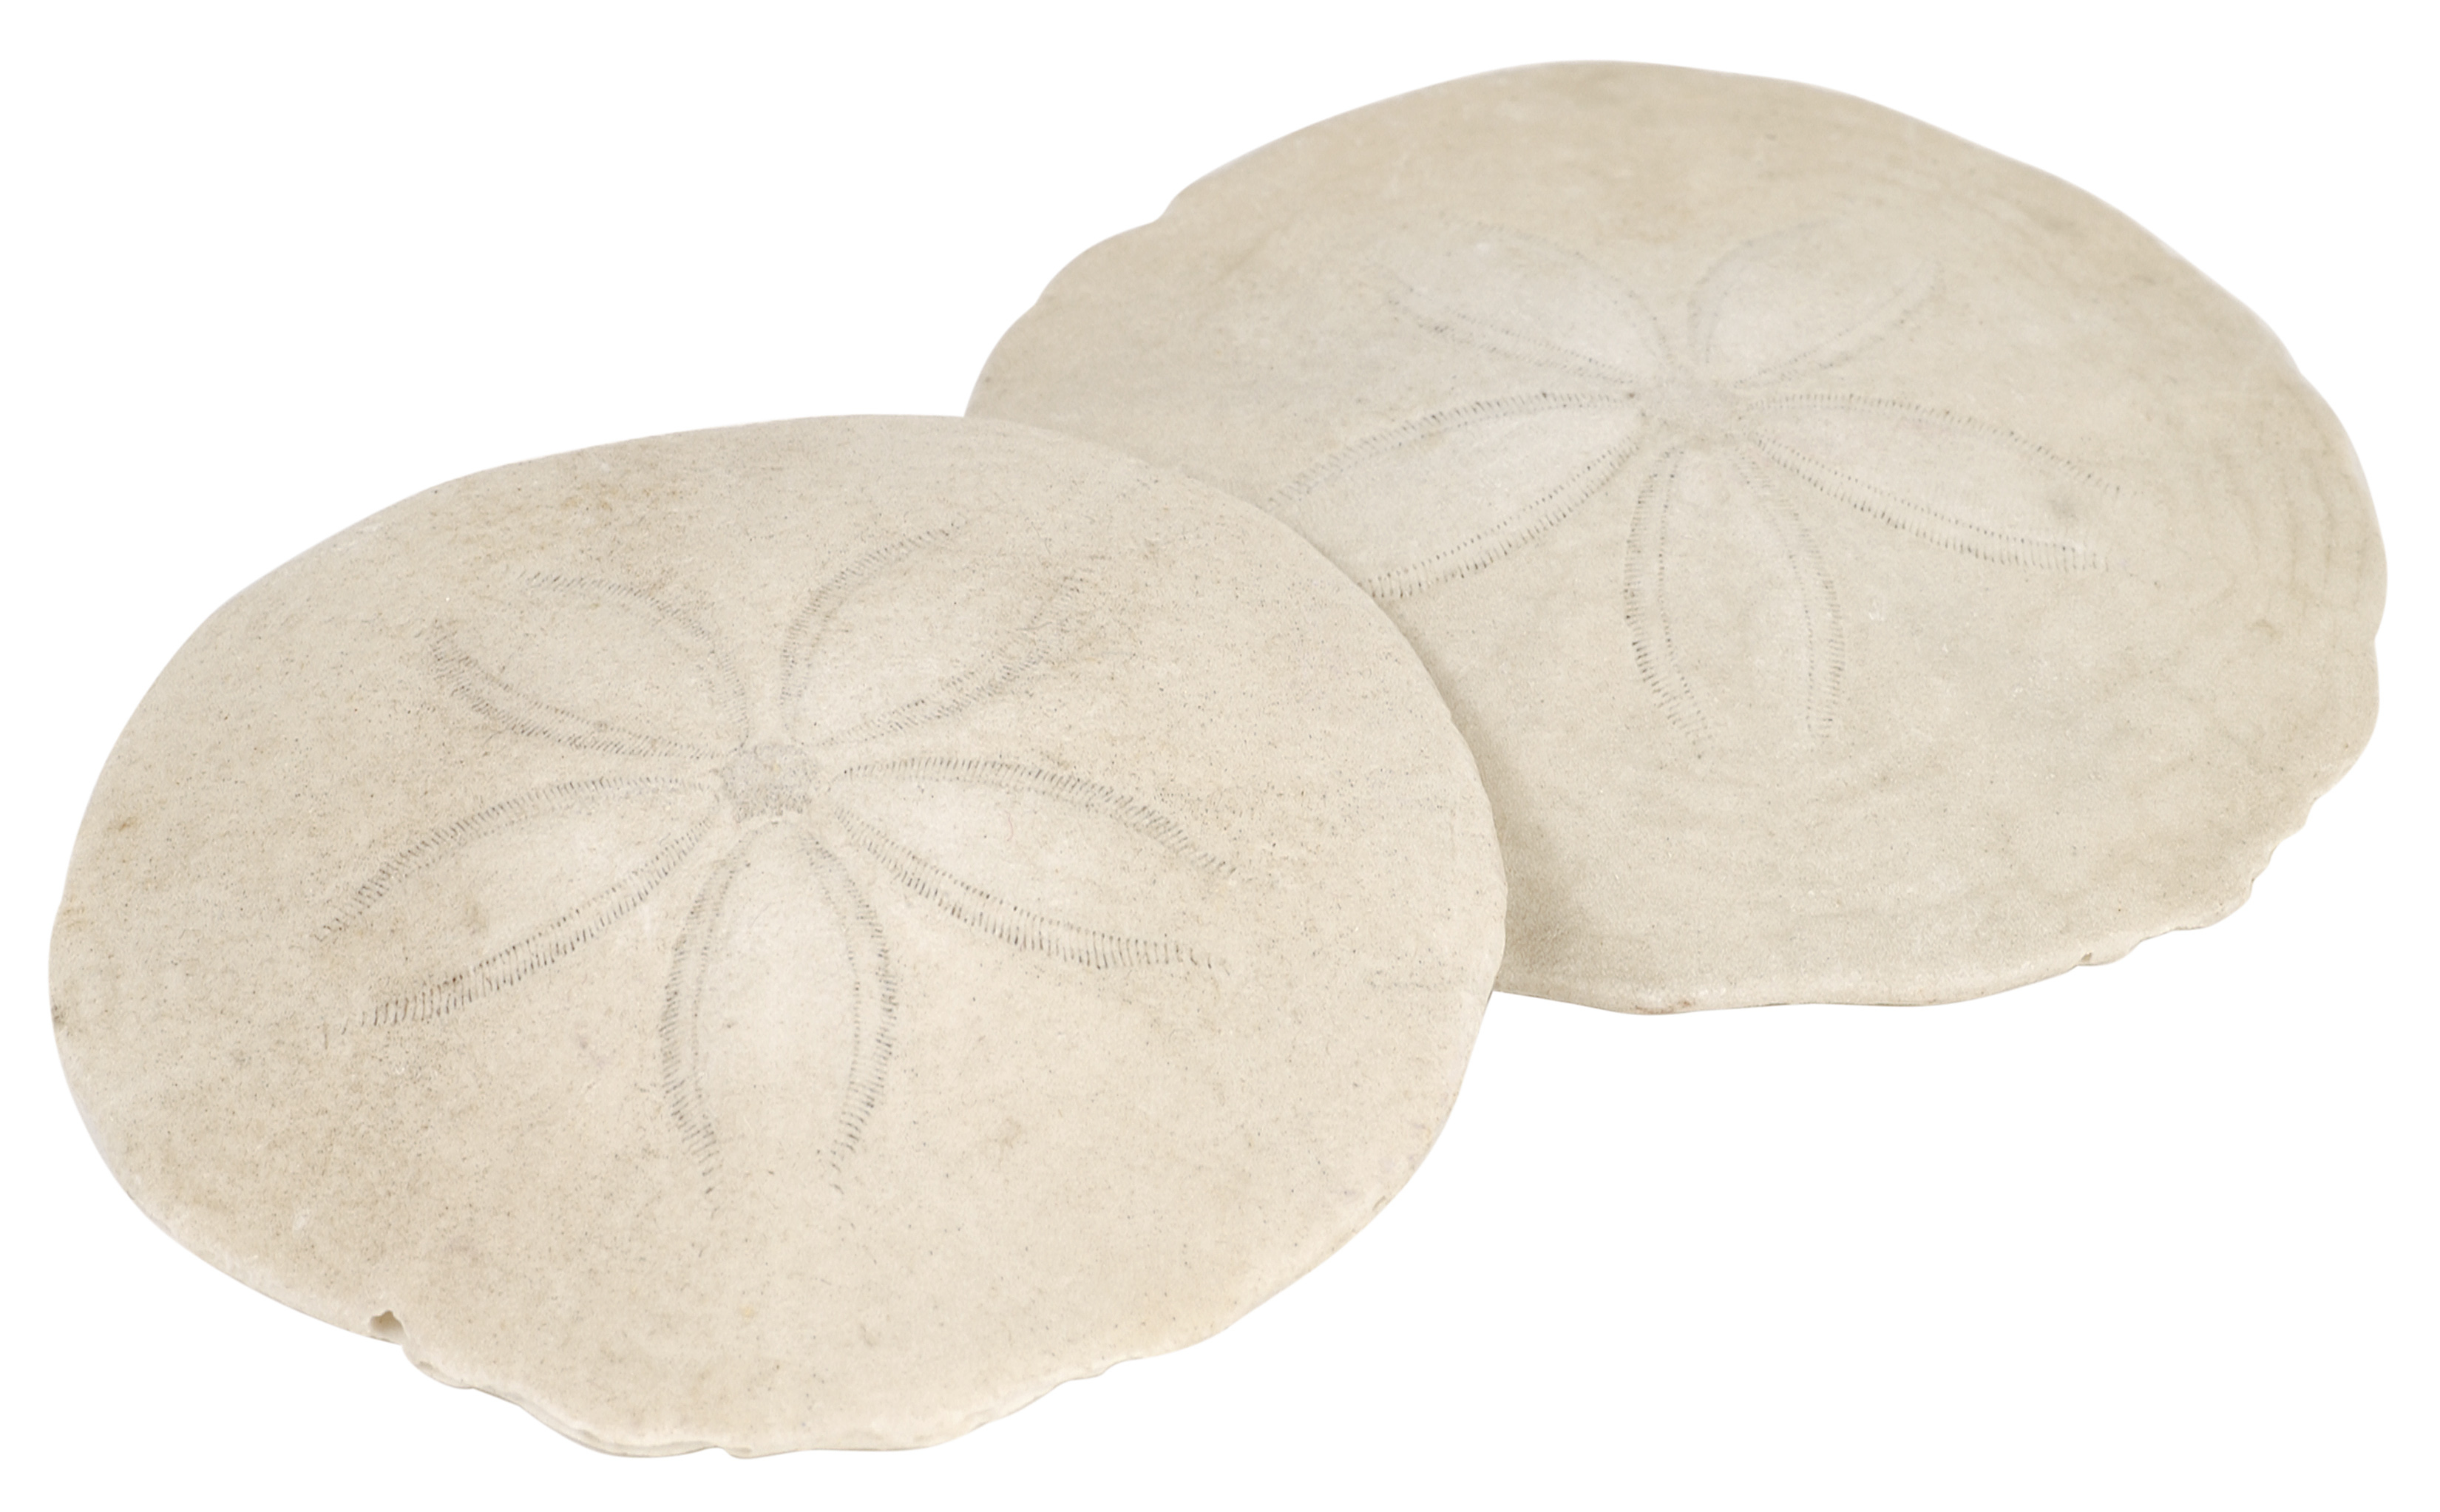 Buy SAND DOLLARS CRAFT 5 Sand Dollars for Crafts and Painting 3 1